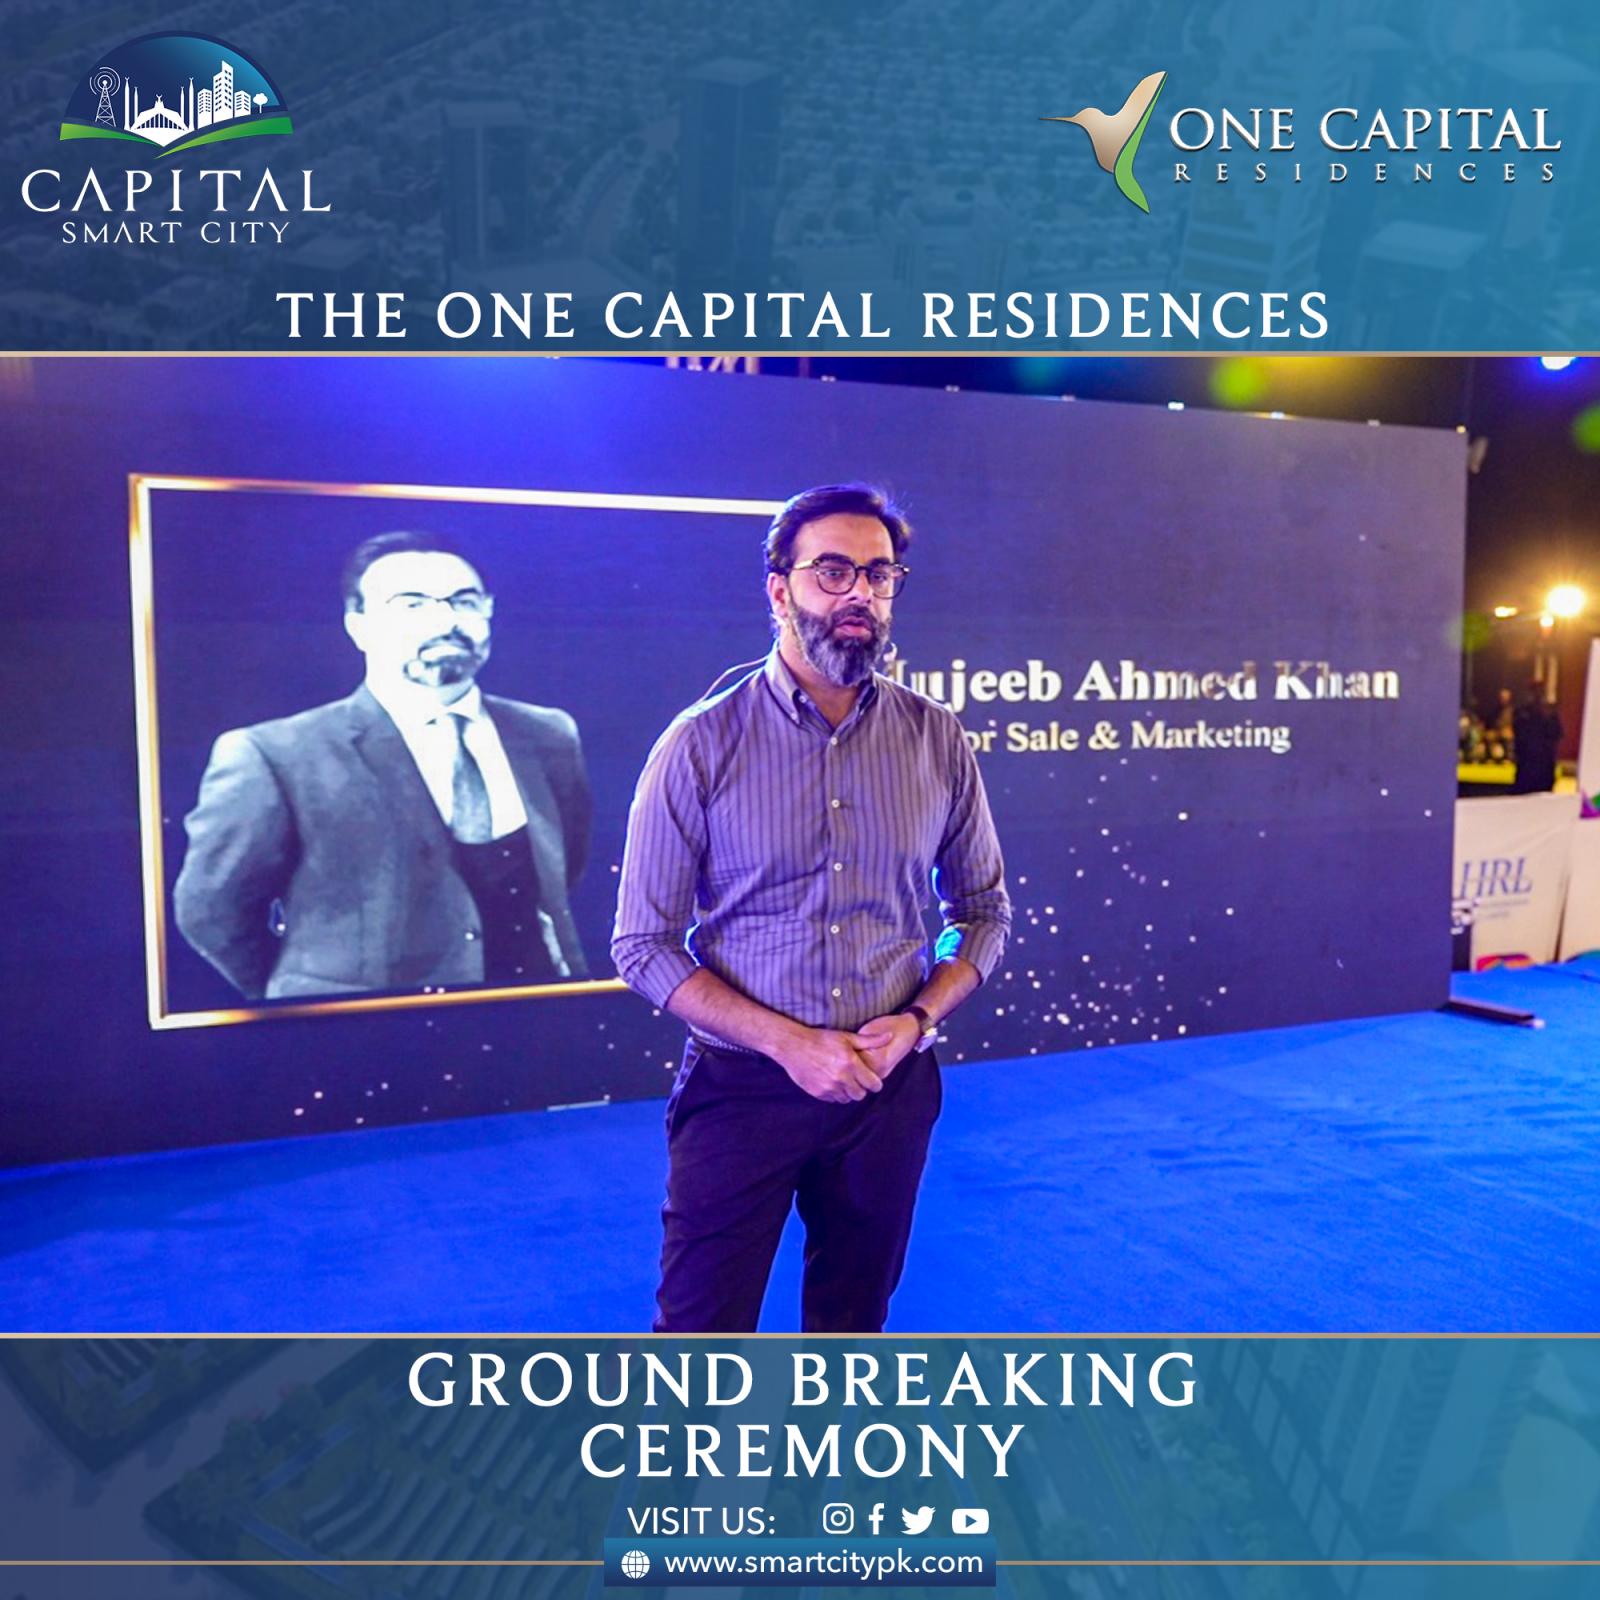 The One Capital Residences ground breaking Ceremony